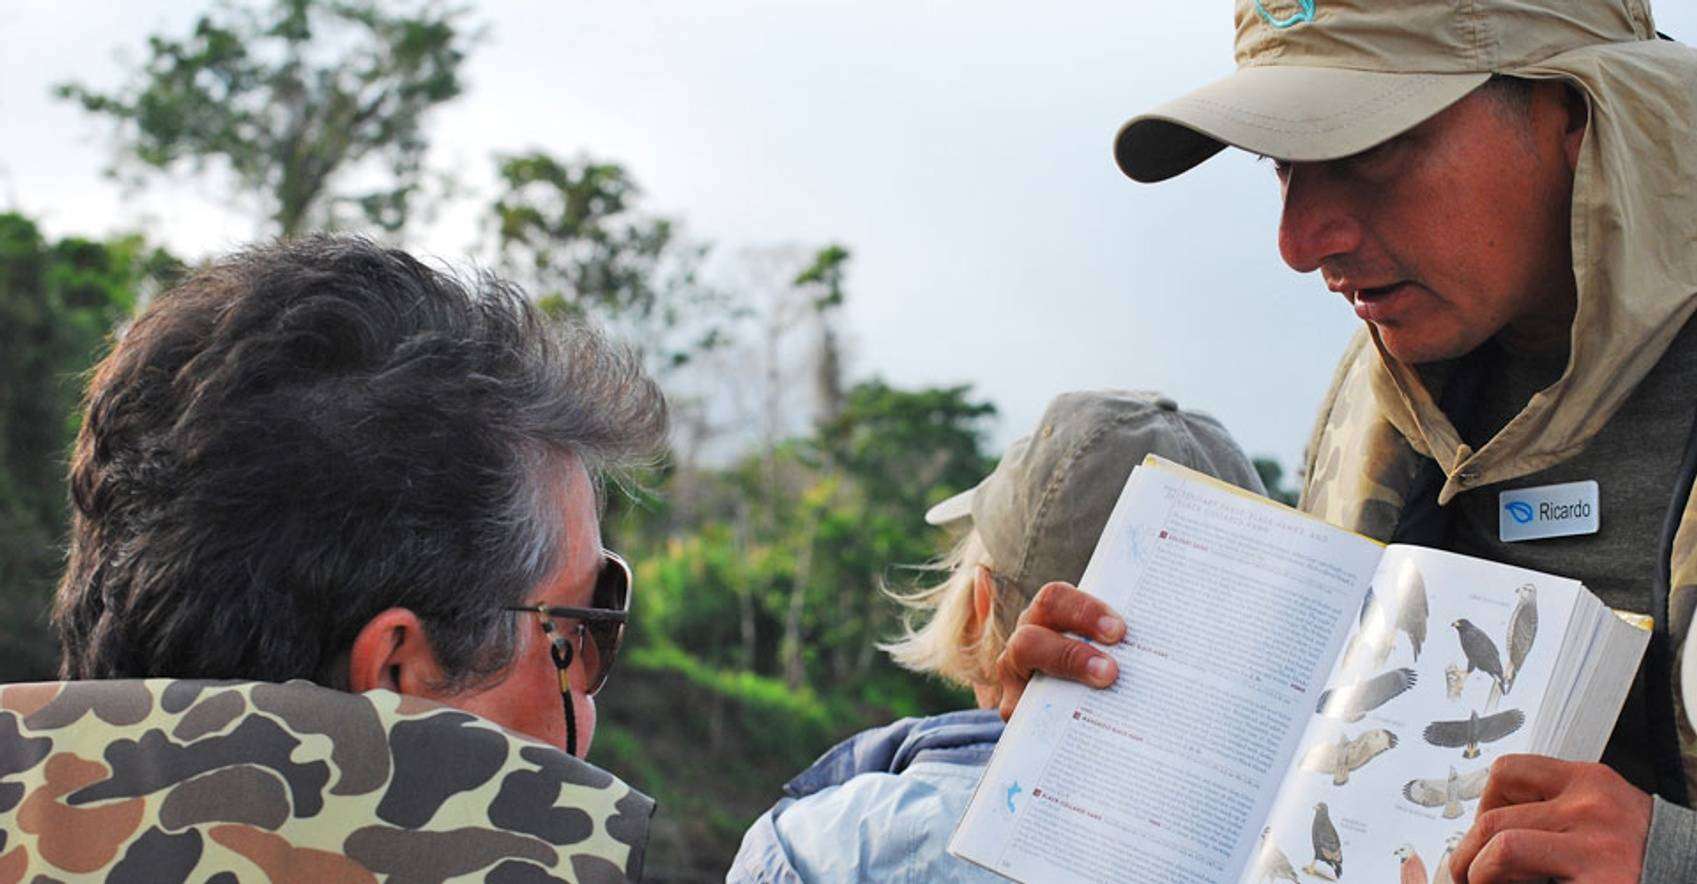 Guide showing his bird guide book to a traveler in the Amazon Rainforest